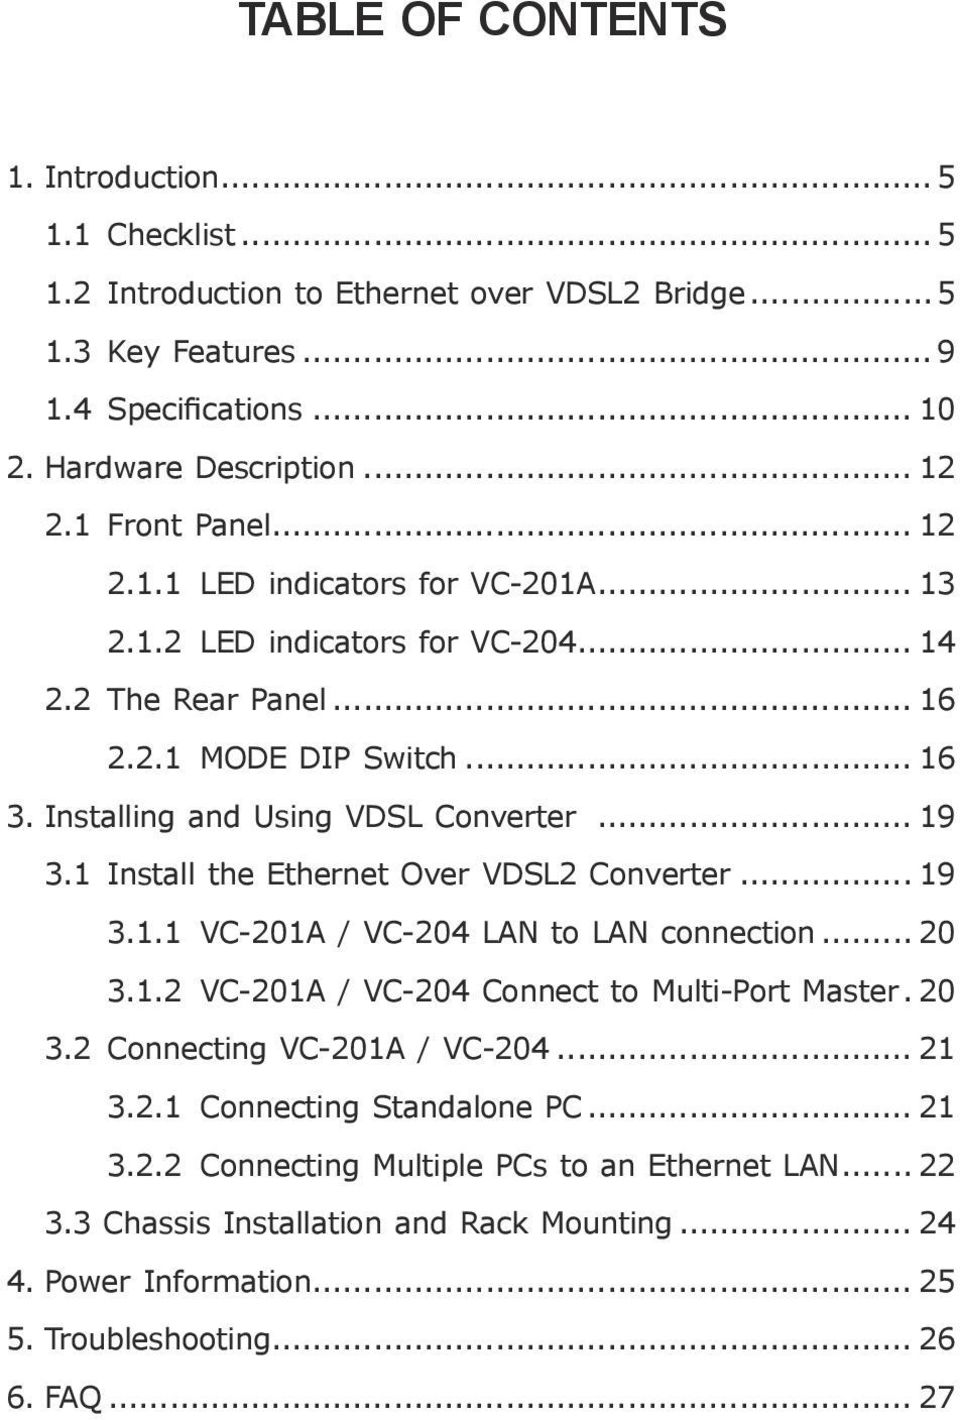 1 Install the Ethernet Over VDSL2 Converter... 19 3.1.1 VC-201A / VC-204 LAN to LAN connection... 20 3.1.2 VC-201A / VC-204 Connect to Multi-Port Master. 20 3.2 Connecting VC-201A / VC-204... 21 3.